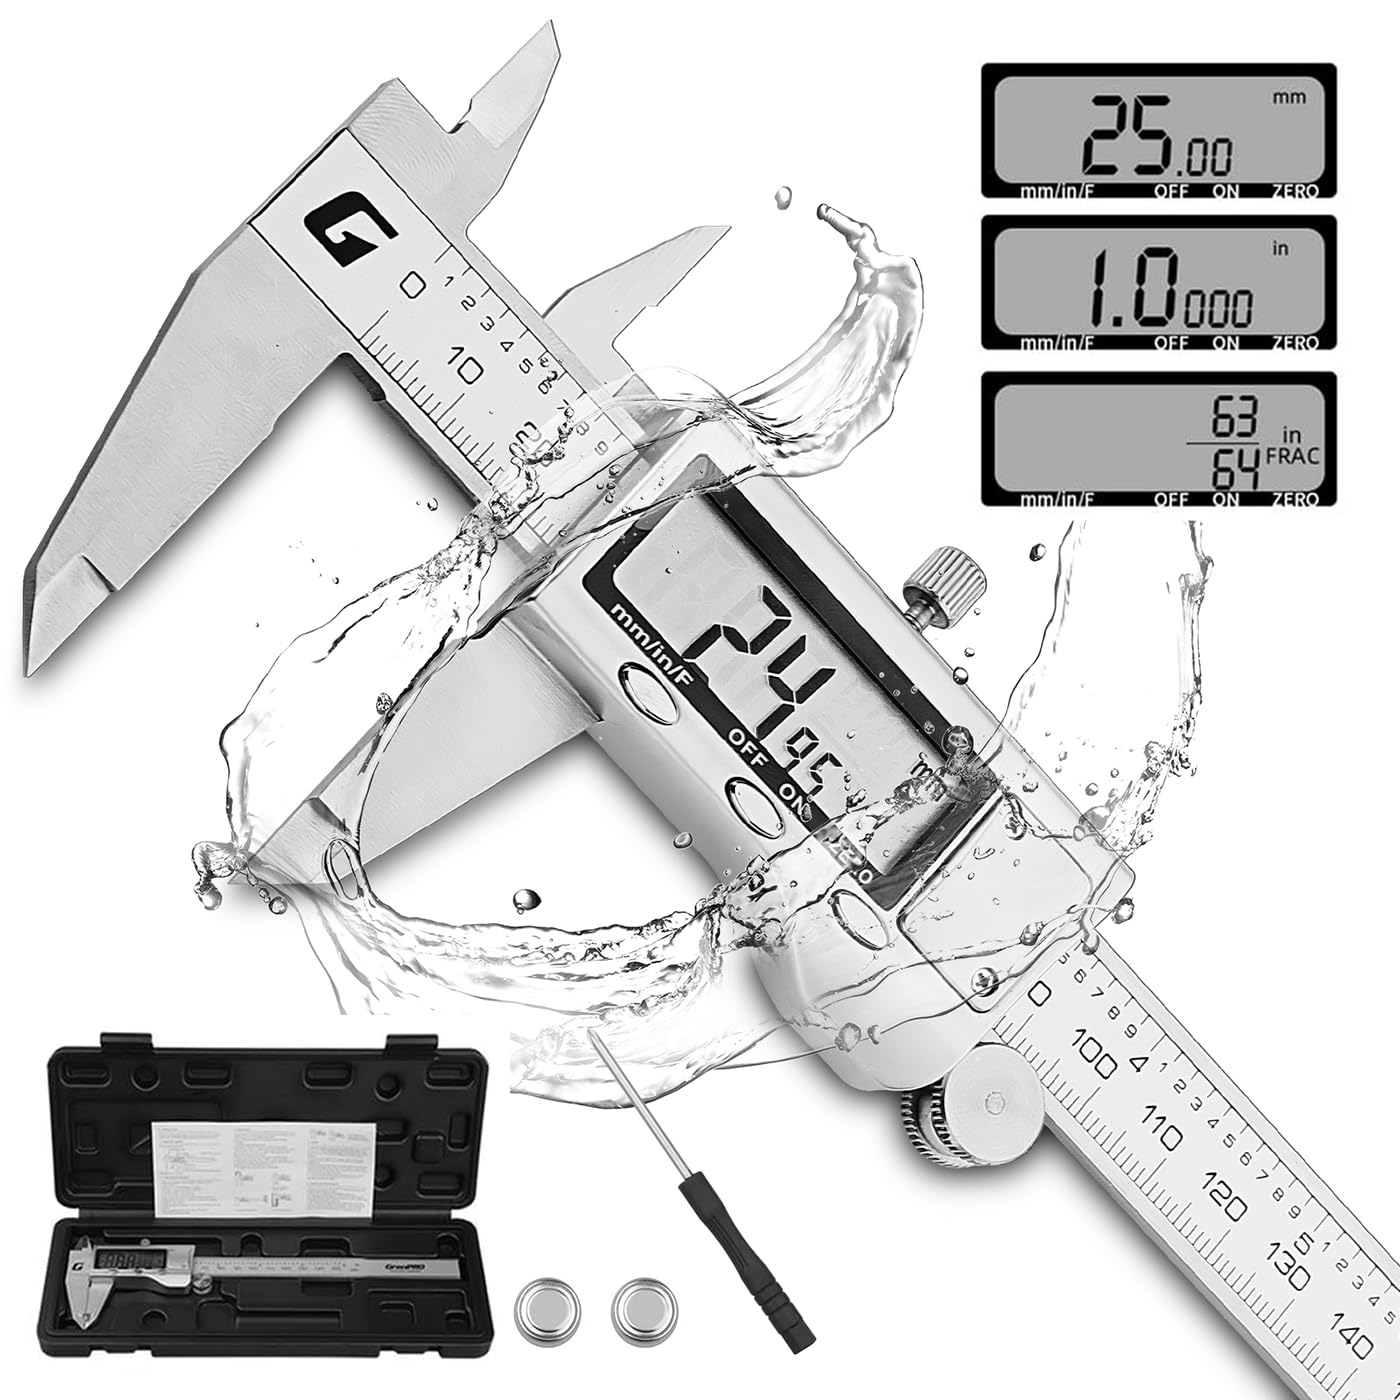 Digital Caliper,6 Inches Electronic Digital Vernier Caliper Measuring Tool,All Metal Micrometer Vernier Caliper with Huge LED Screen for Woodworking Jewelry, Polished Silver